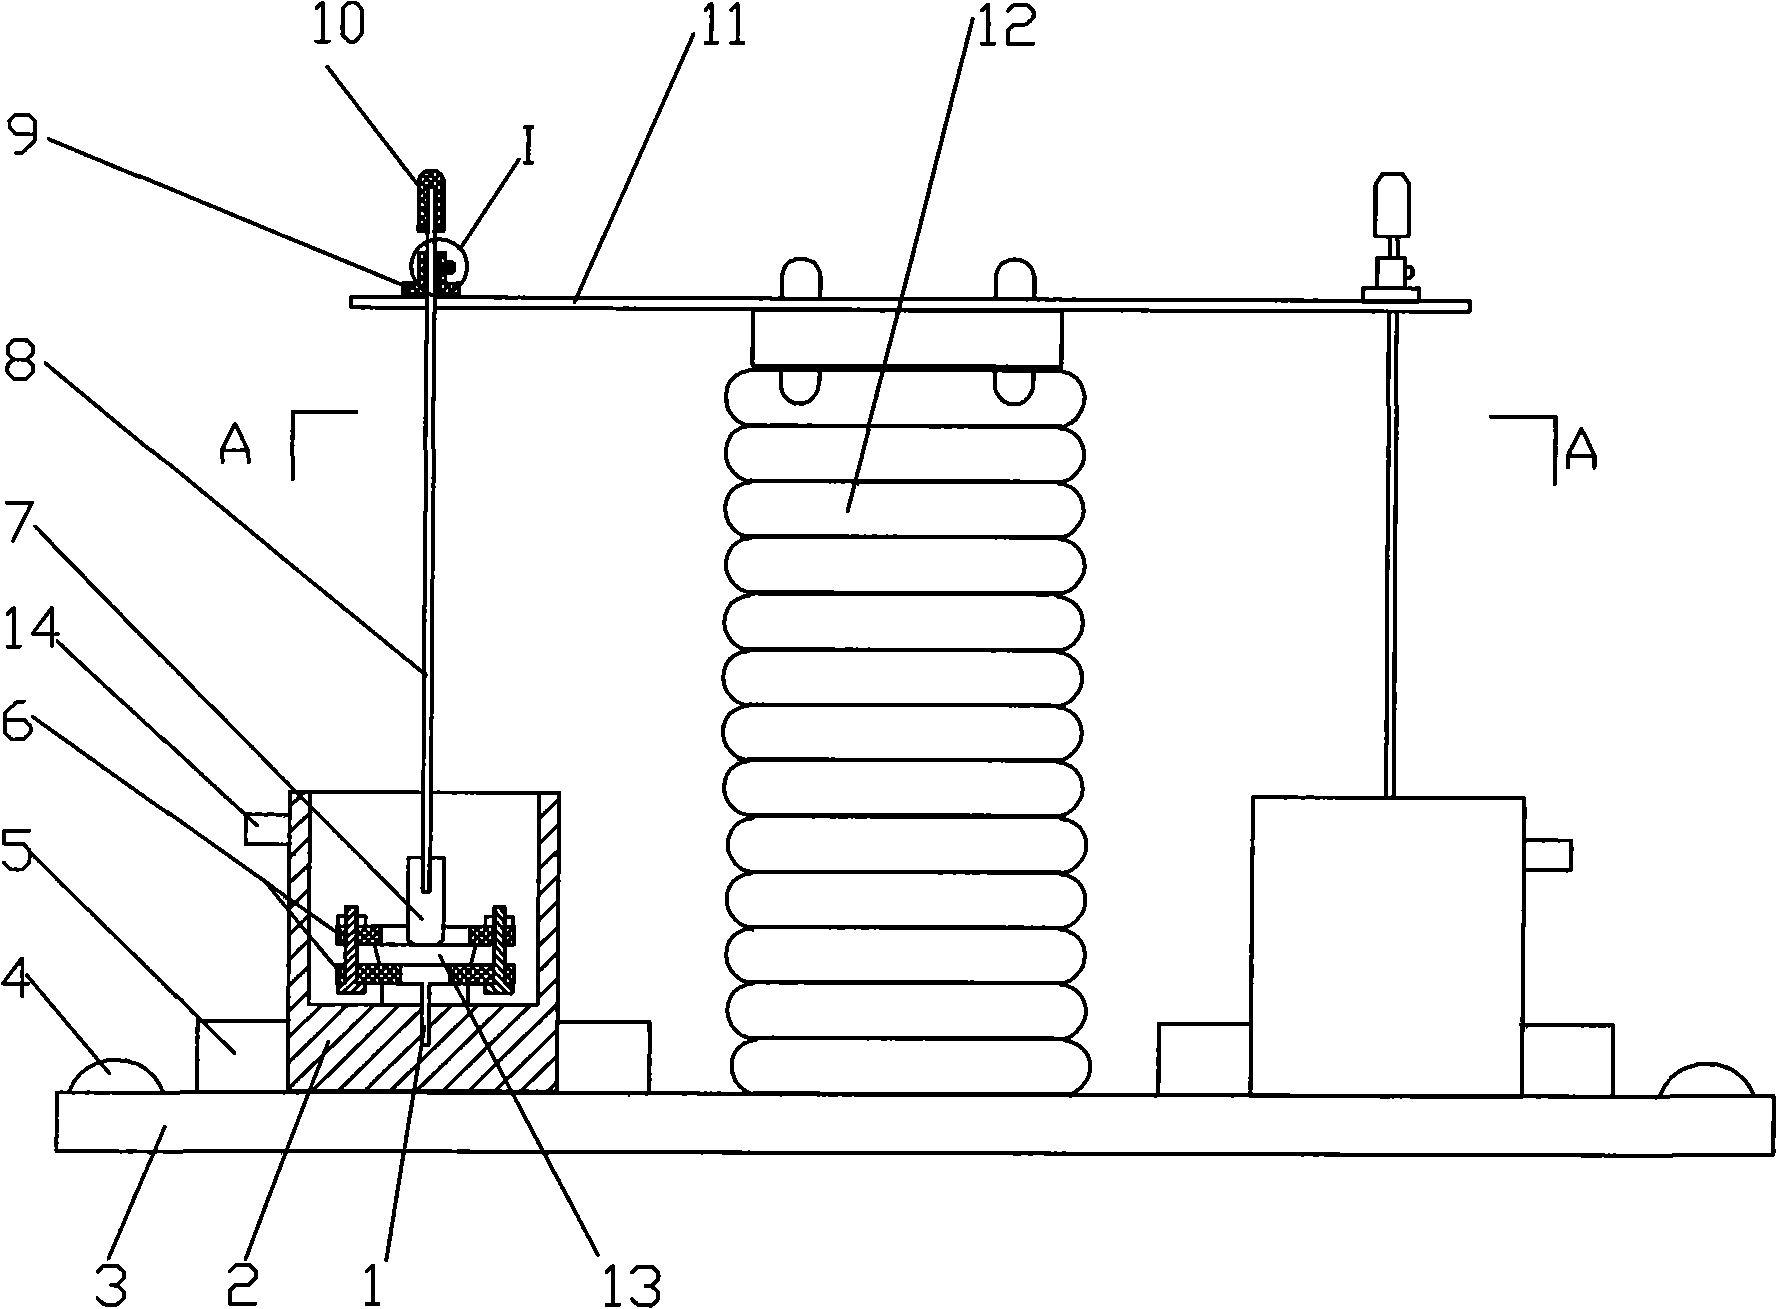 Multi-insulated sample local discharge test electrode apparatus